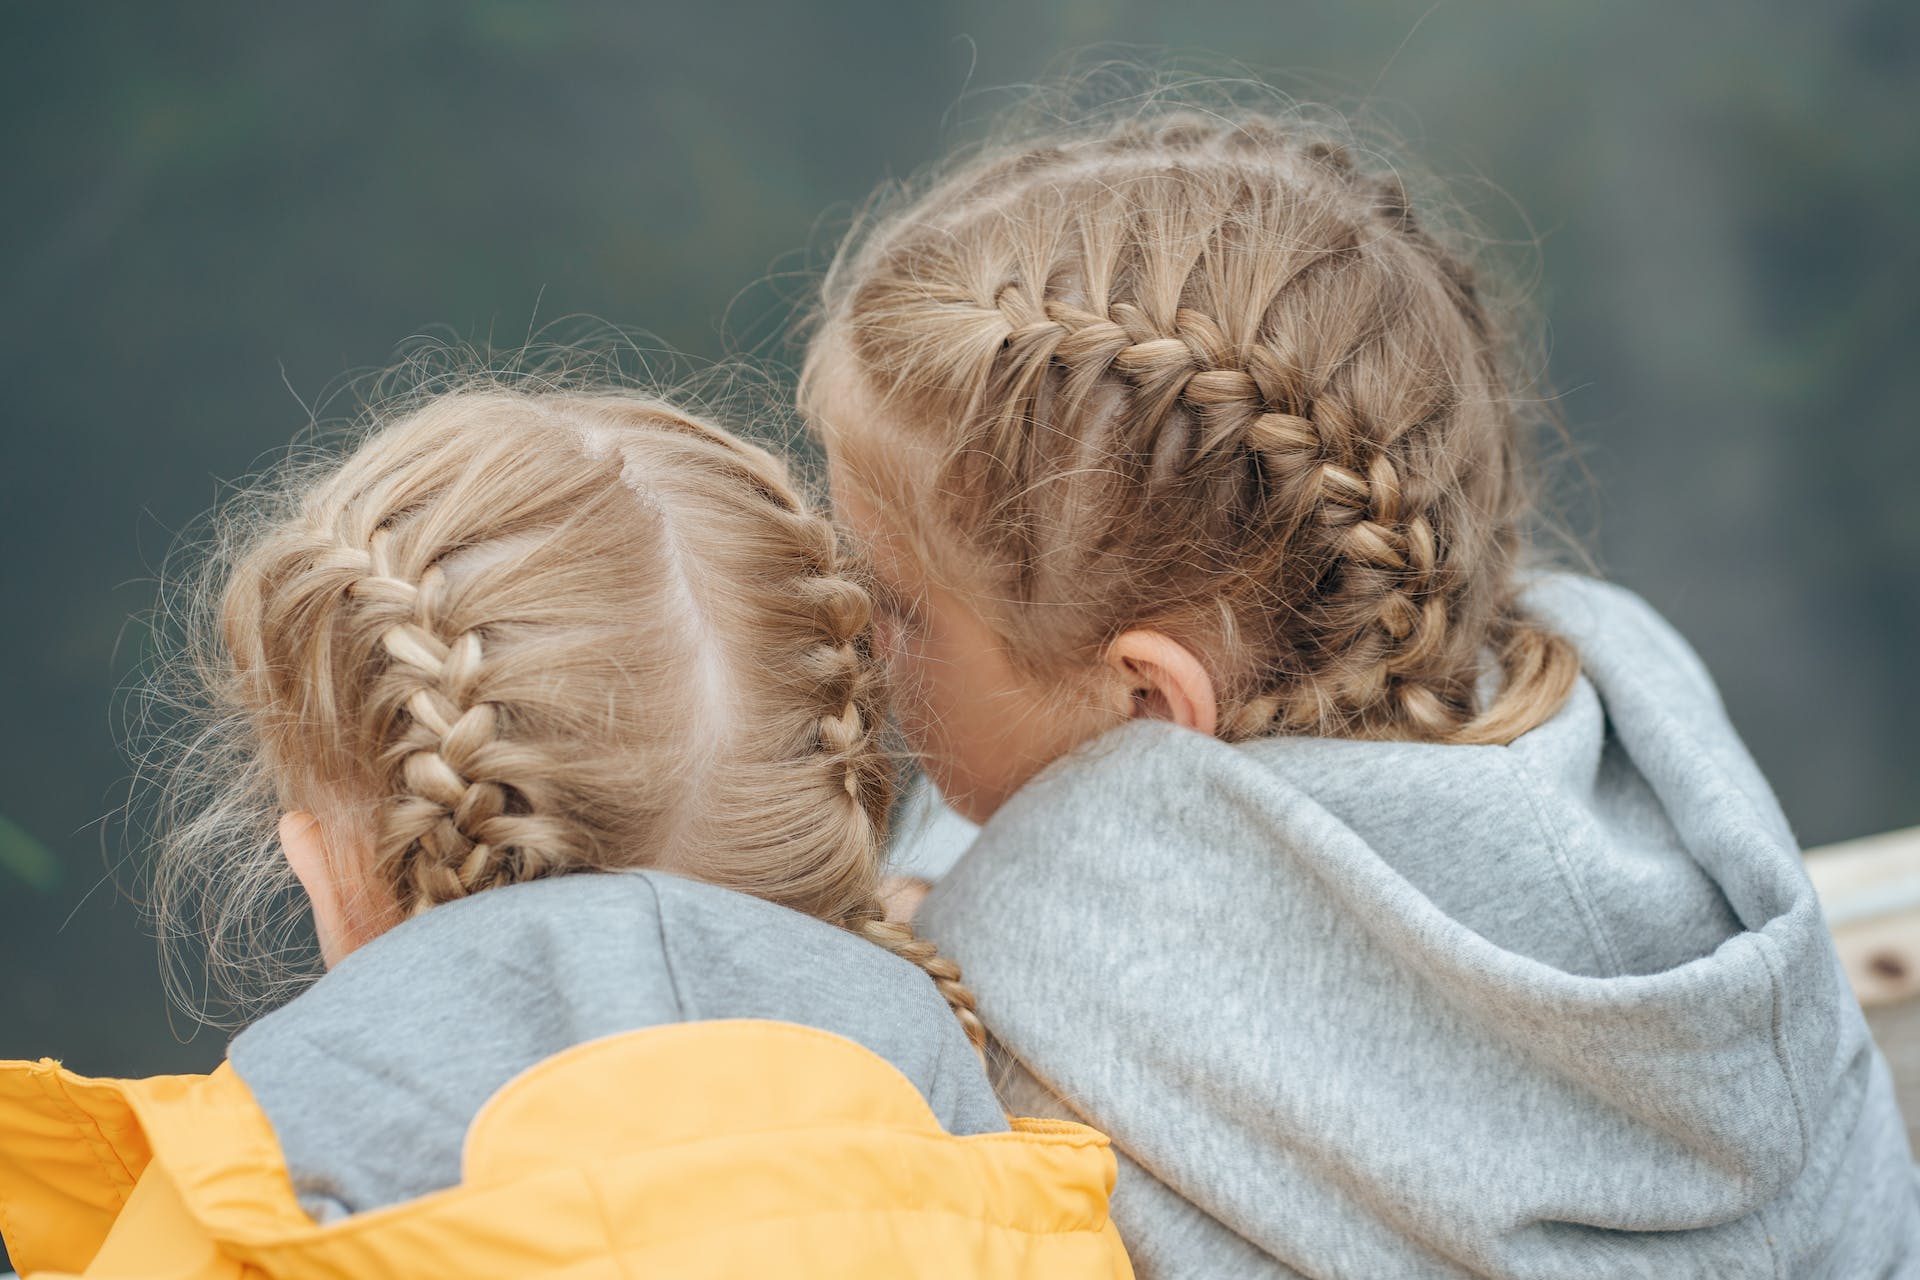 Two little girls | Source: Pexels